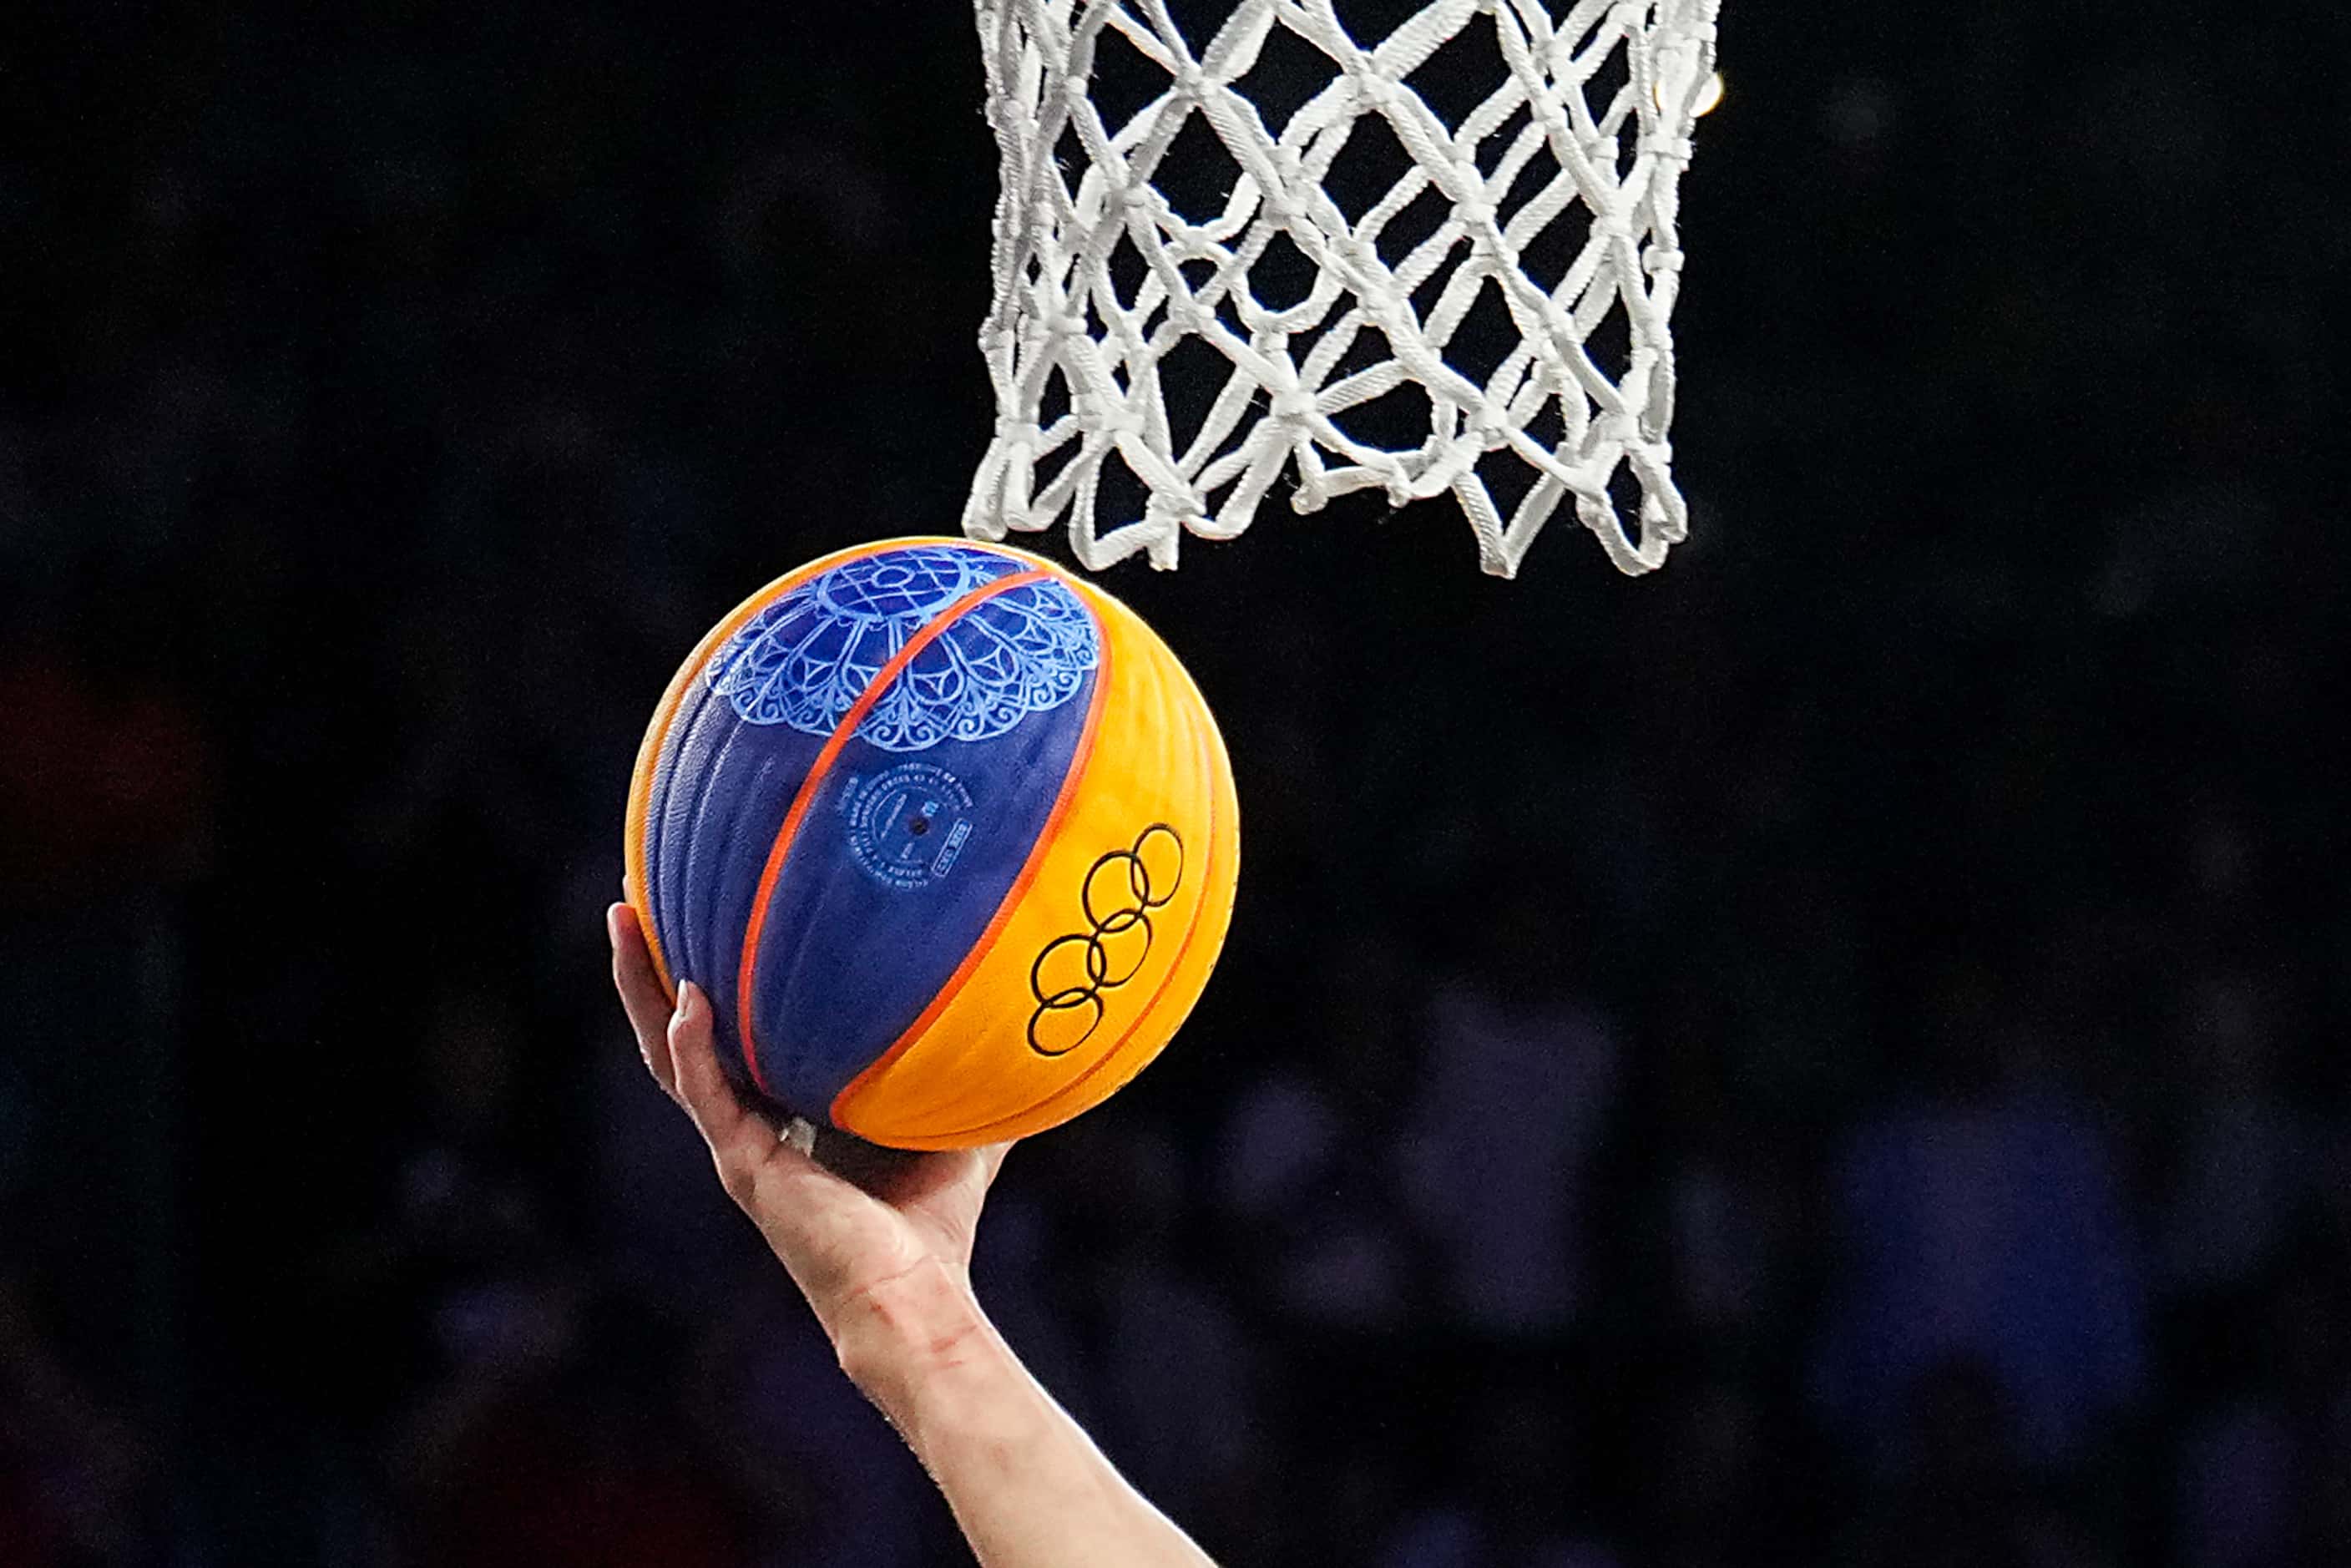 Worthy de Jong of the Netherlands goes for a layup during the men’s 3x3 basketball gold...